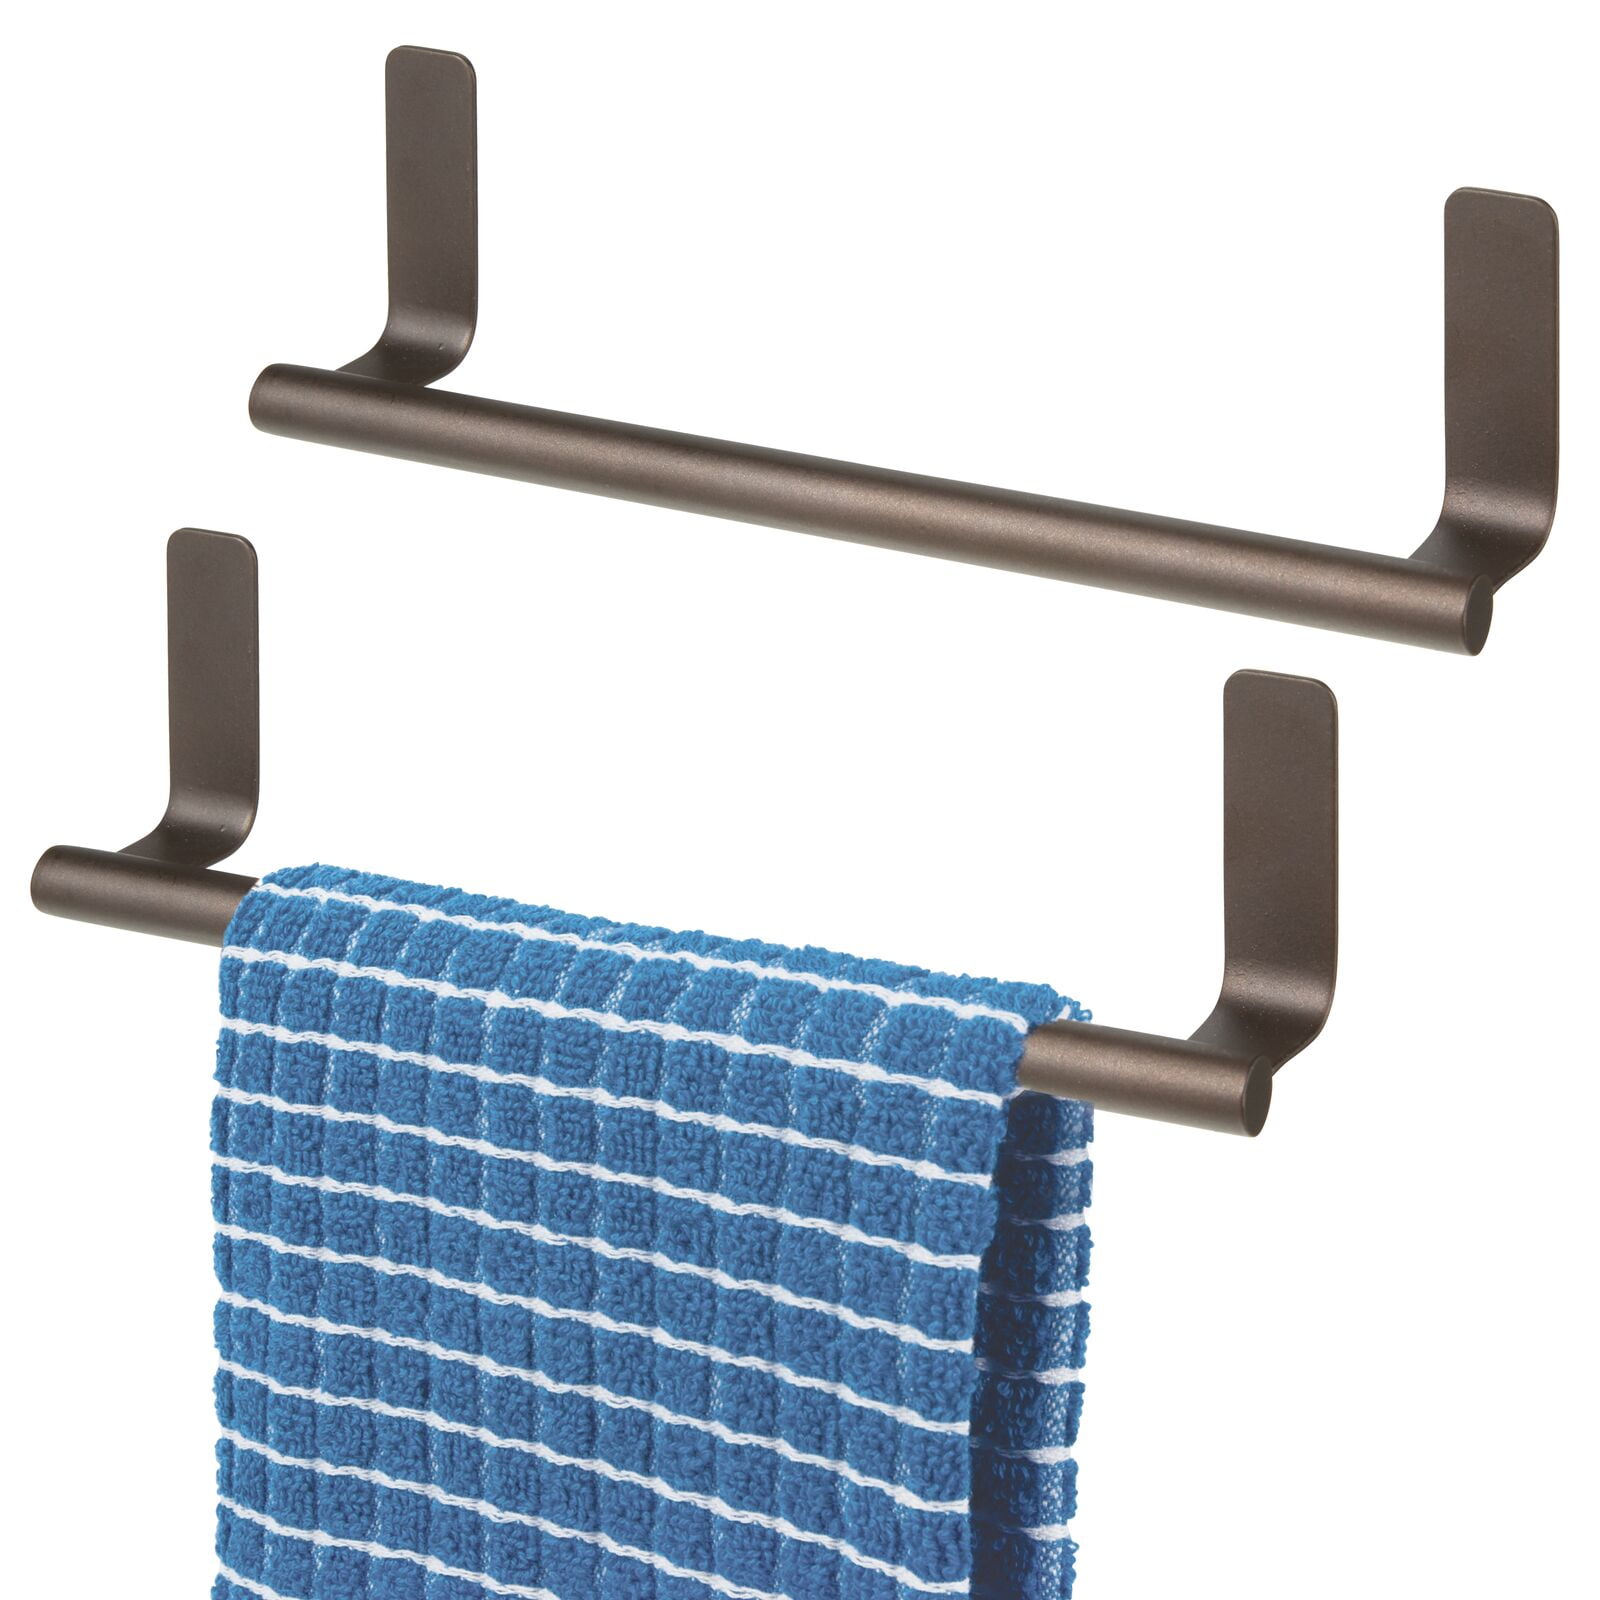 LeongLzt Self-Adhesive Hand Towel Holder Stainless Steel (Brushed Nickel)  Stick-On Hand Towel Bar/Towel Rack with Dual Installation Options for